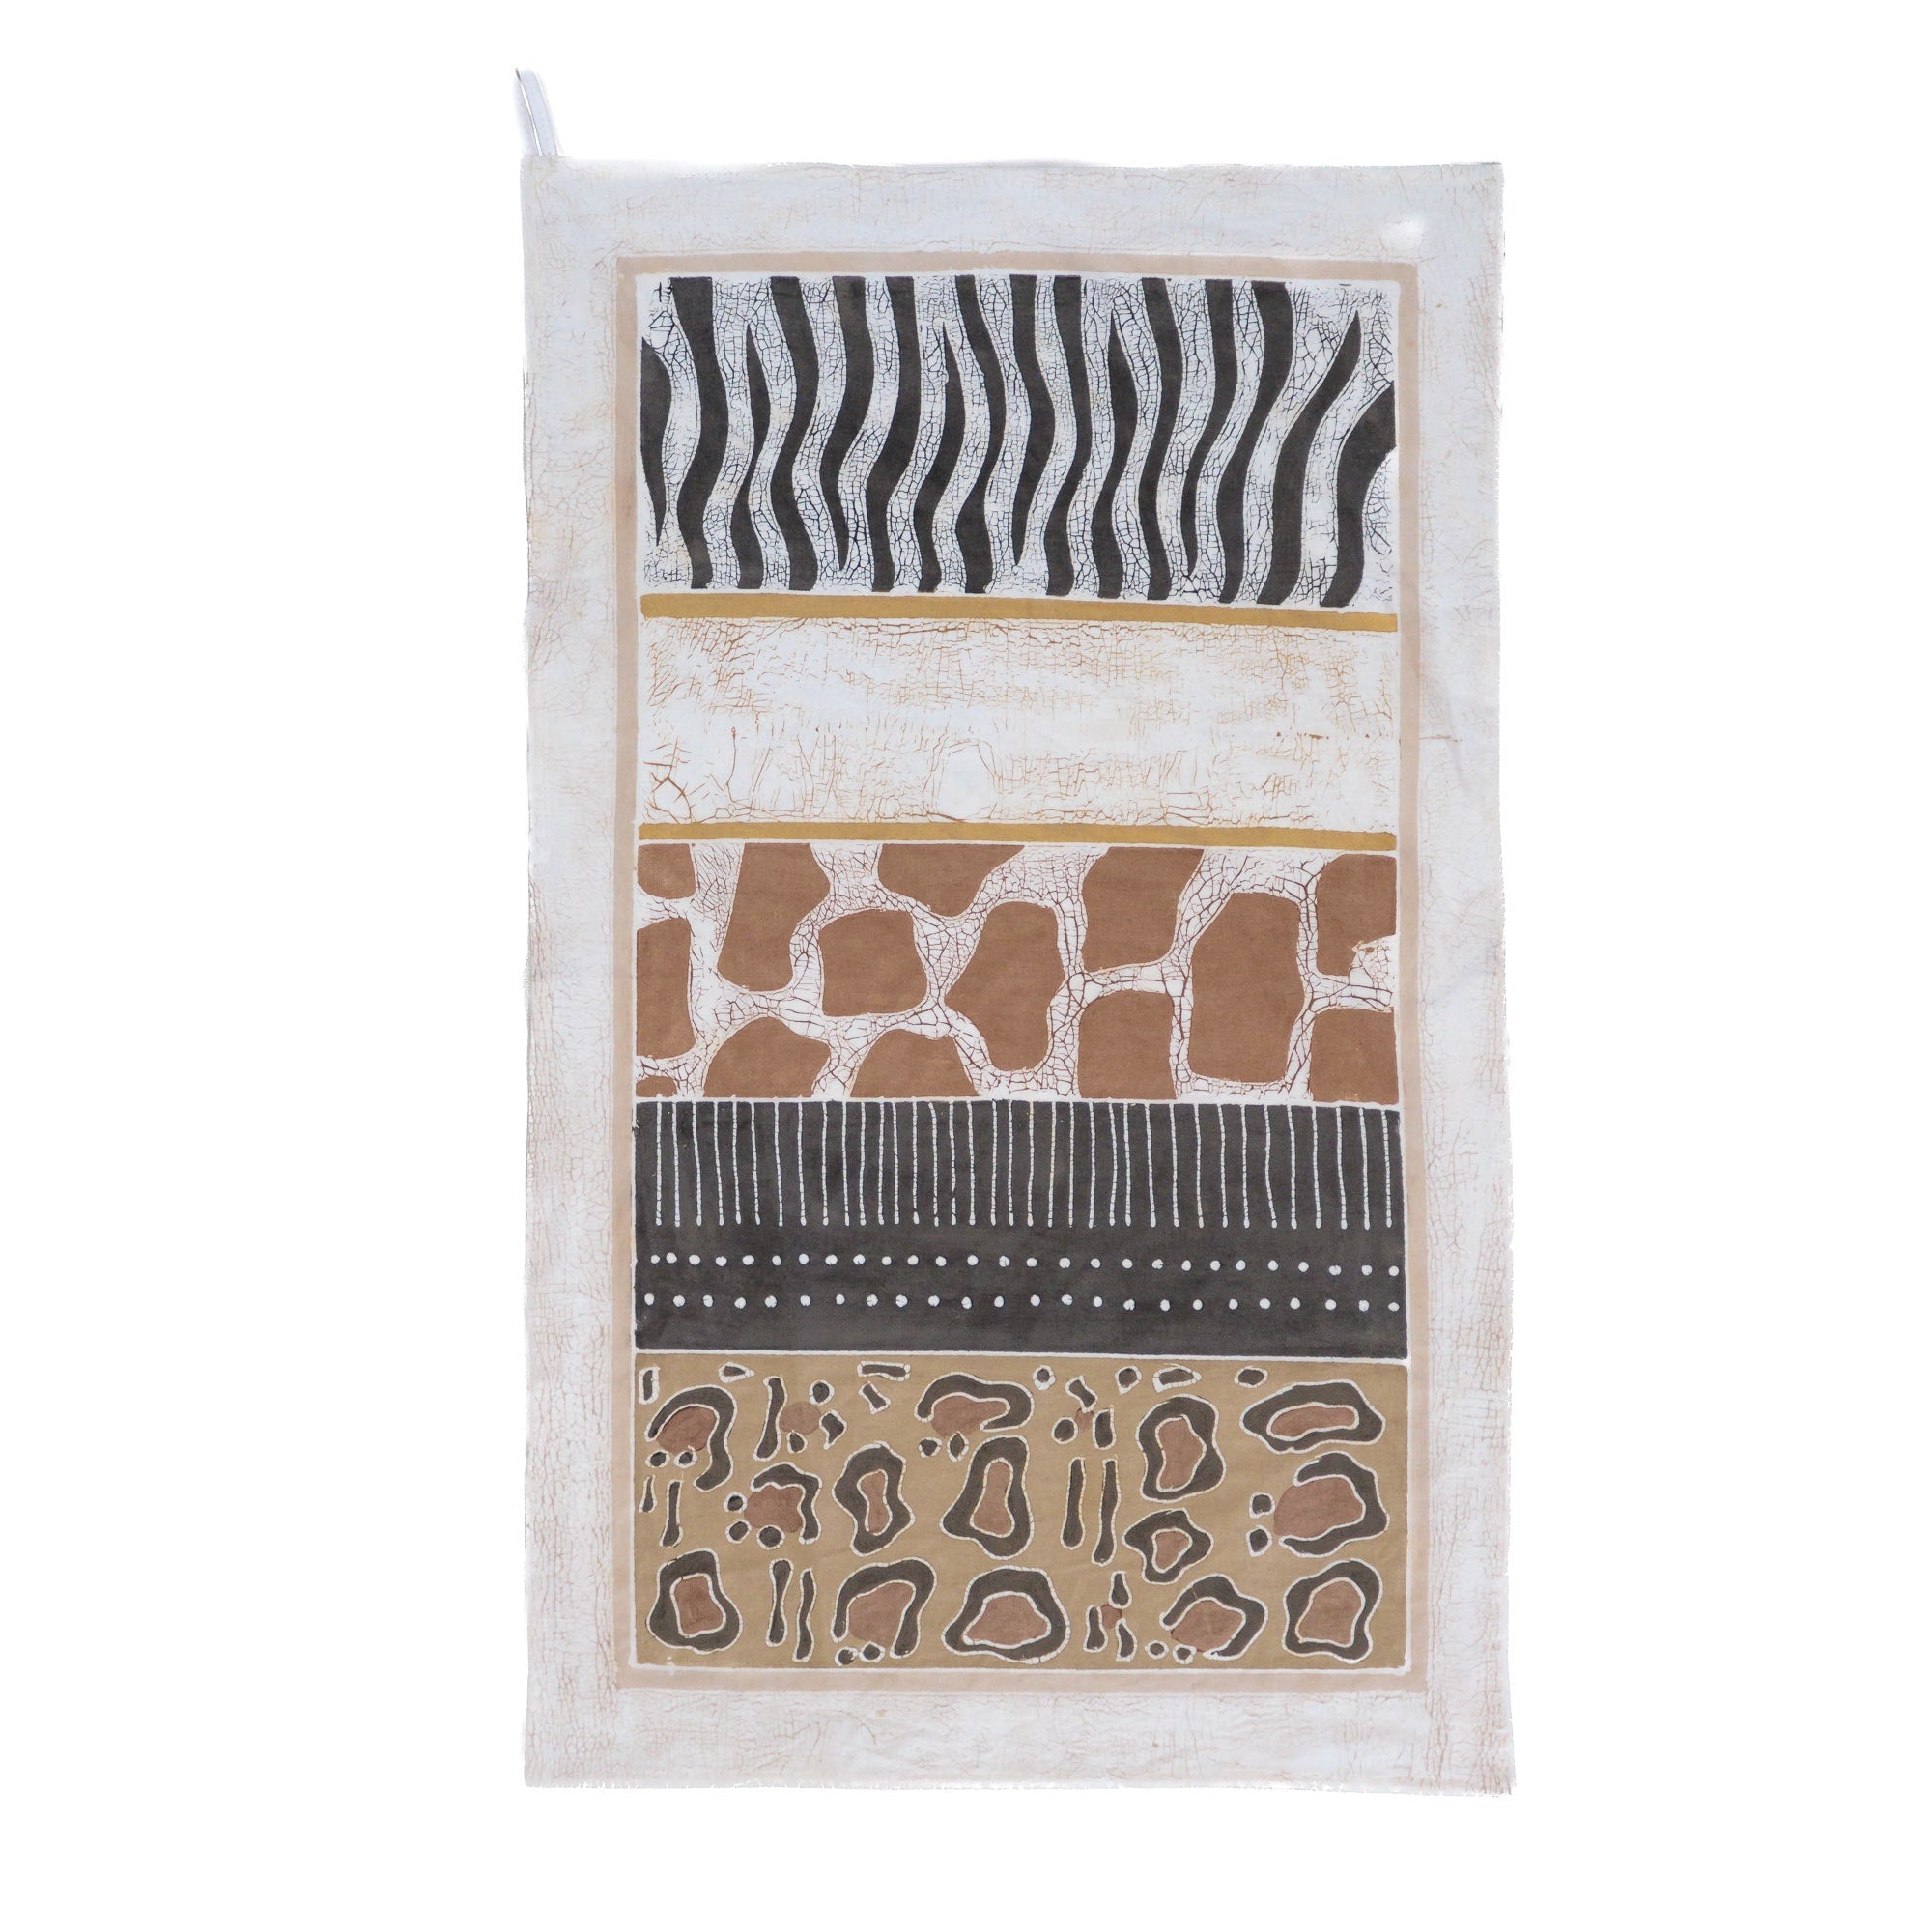 Animal multiprint kitchen towel design handcrafted on eco cotton.